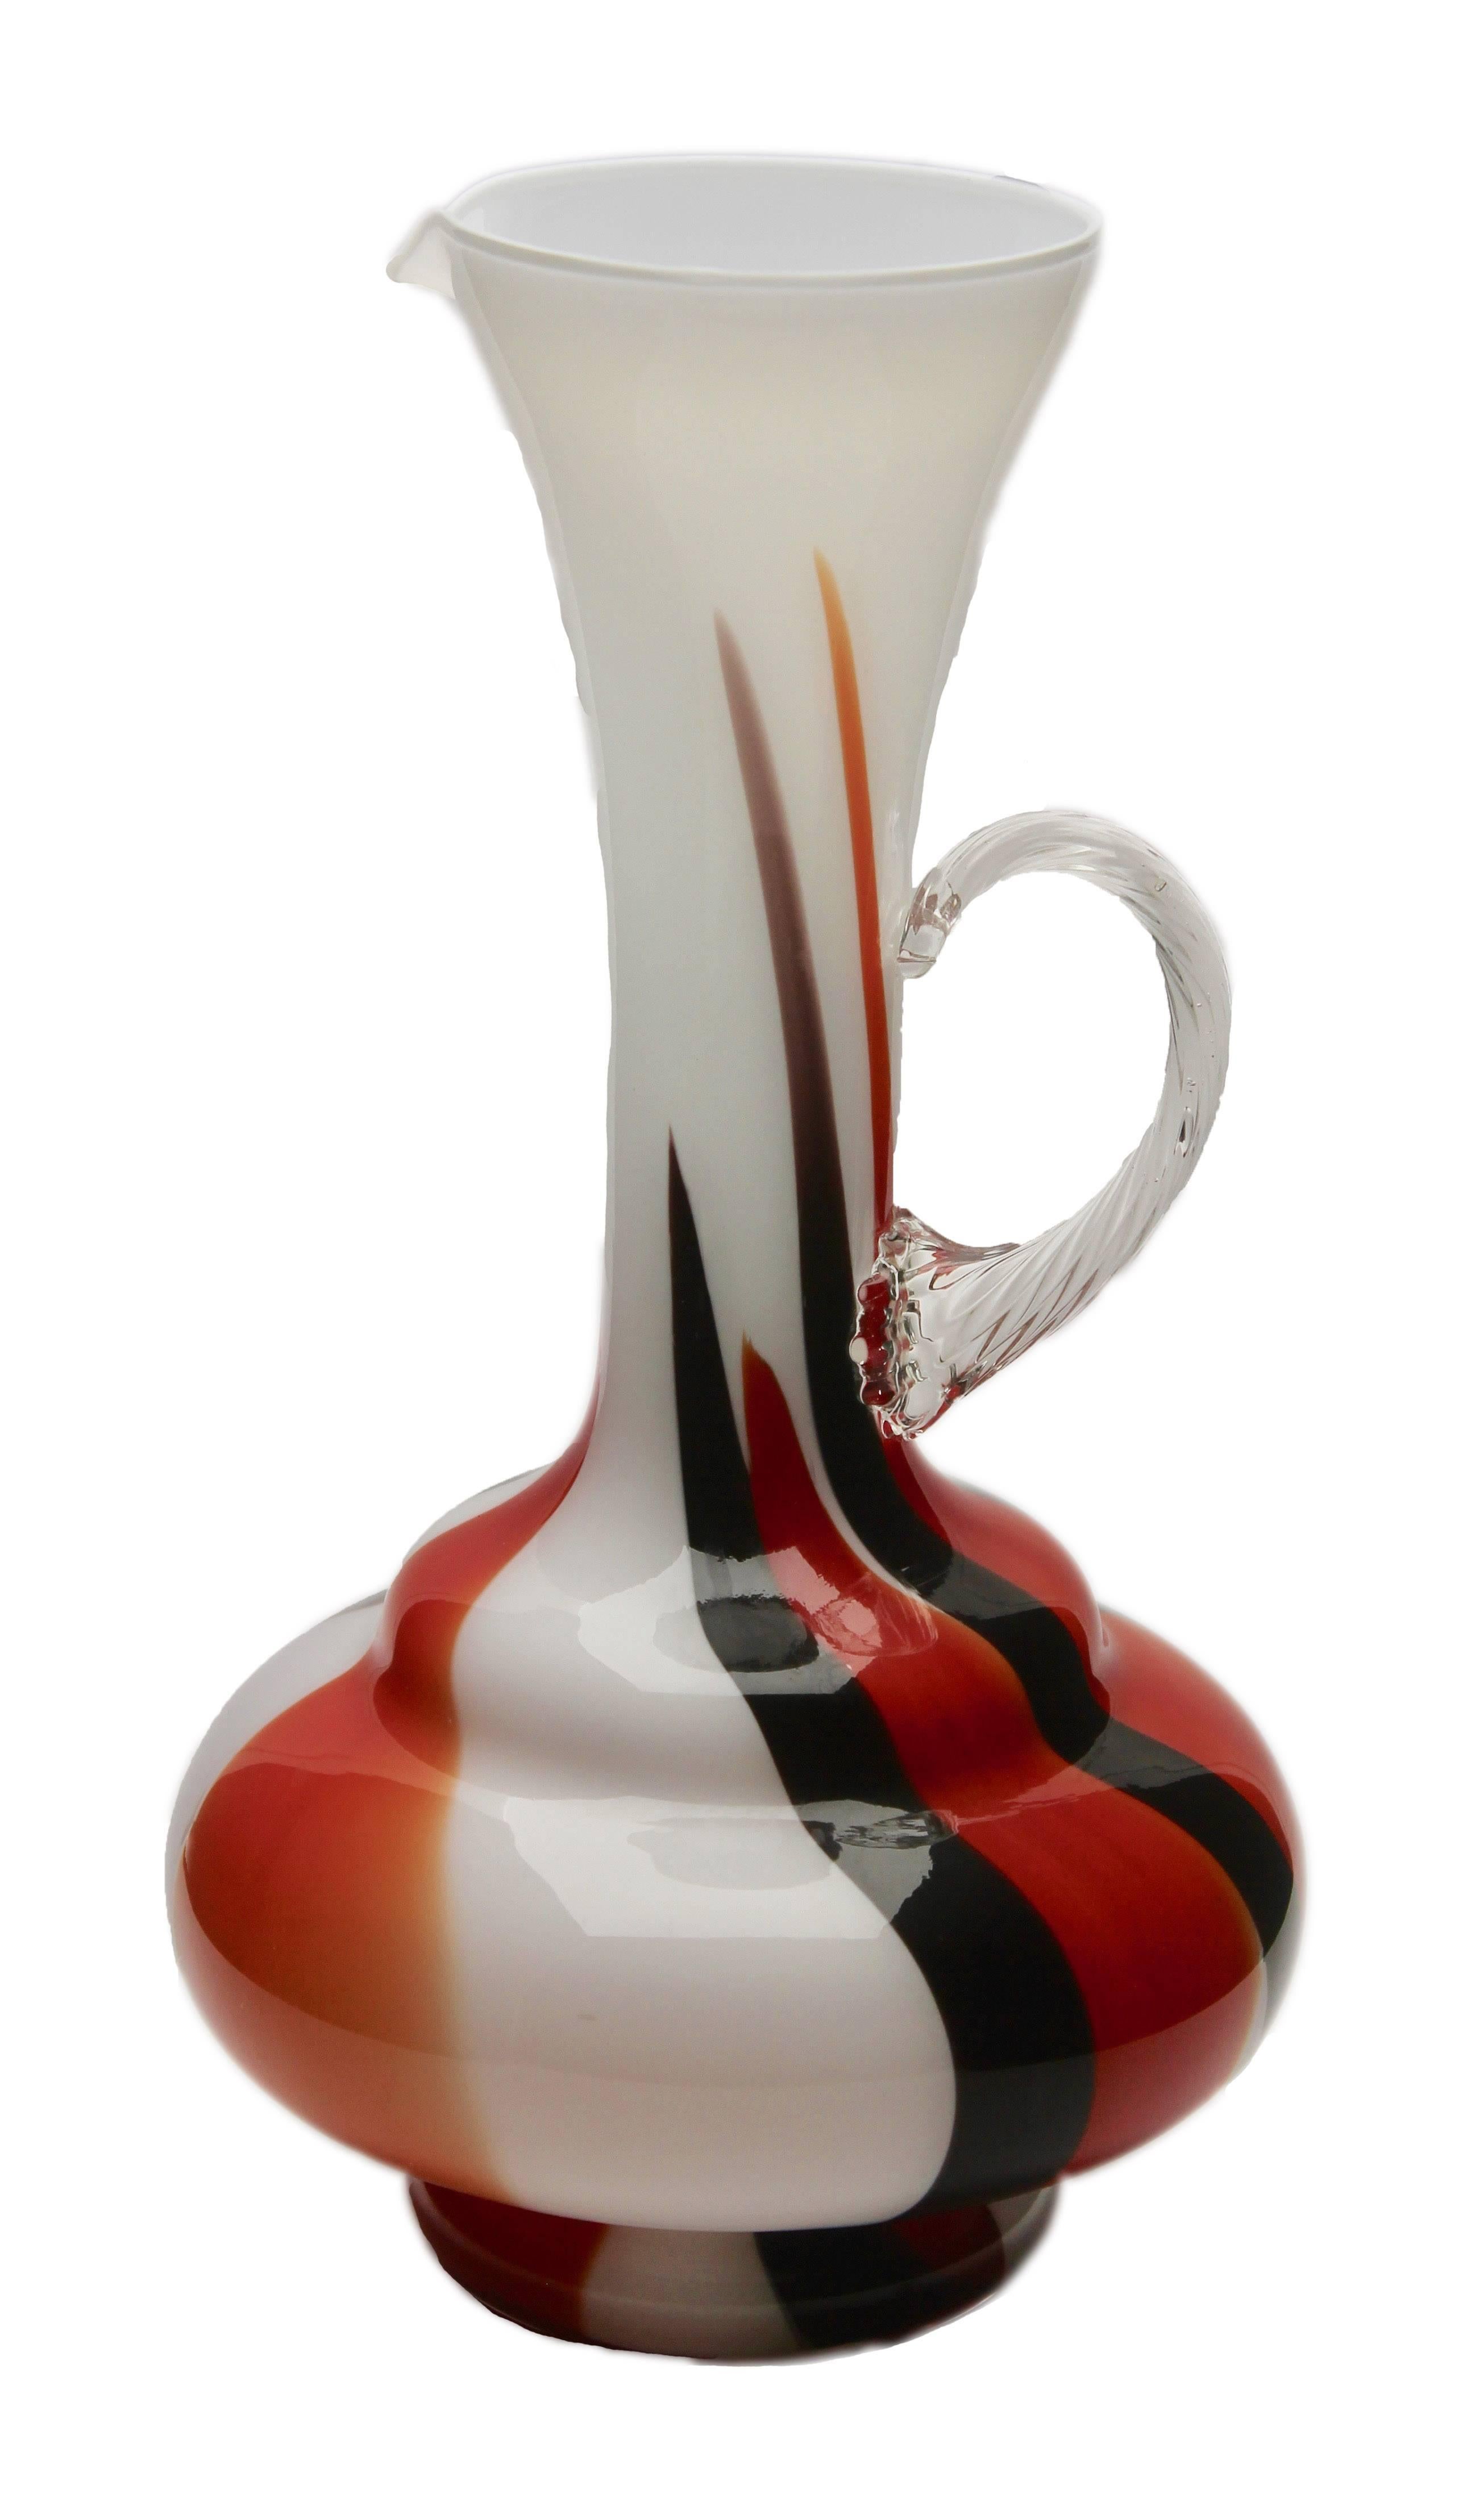 Italian Vintage 'Space Age' Pitcher, Opaline Florence Vase, circa 1955 For Sale